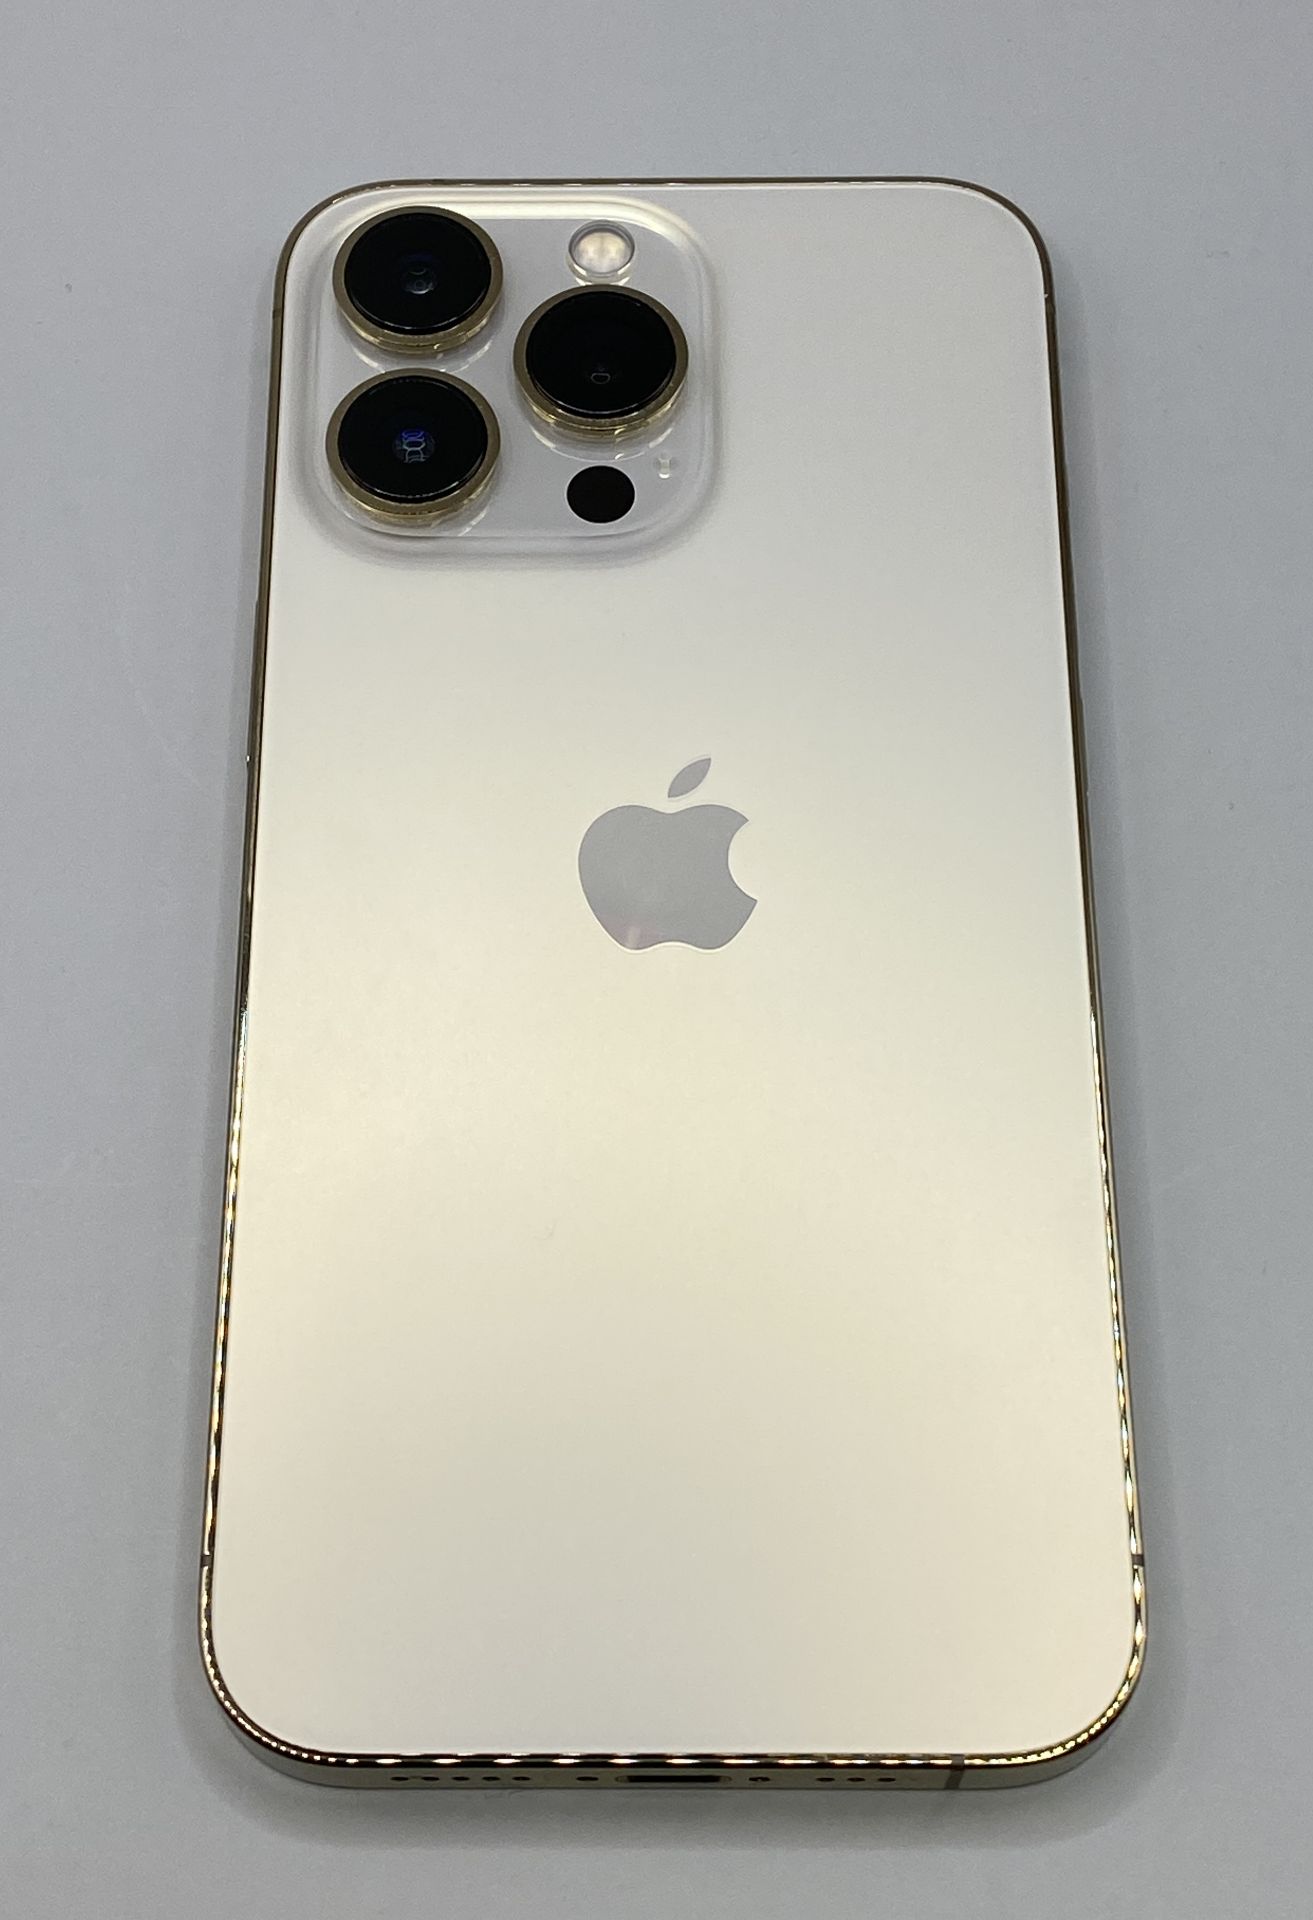 Apple iPhone 13 Pro 128GB - Gold - Model MLVC3B/A - complete with box and charging cable - Image 7 of 18